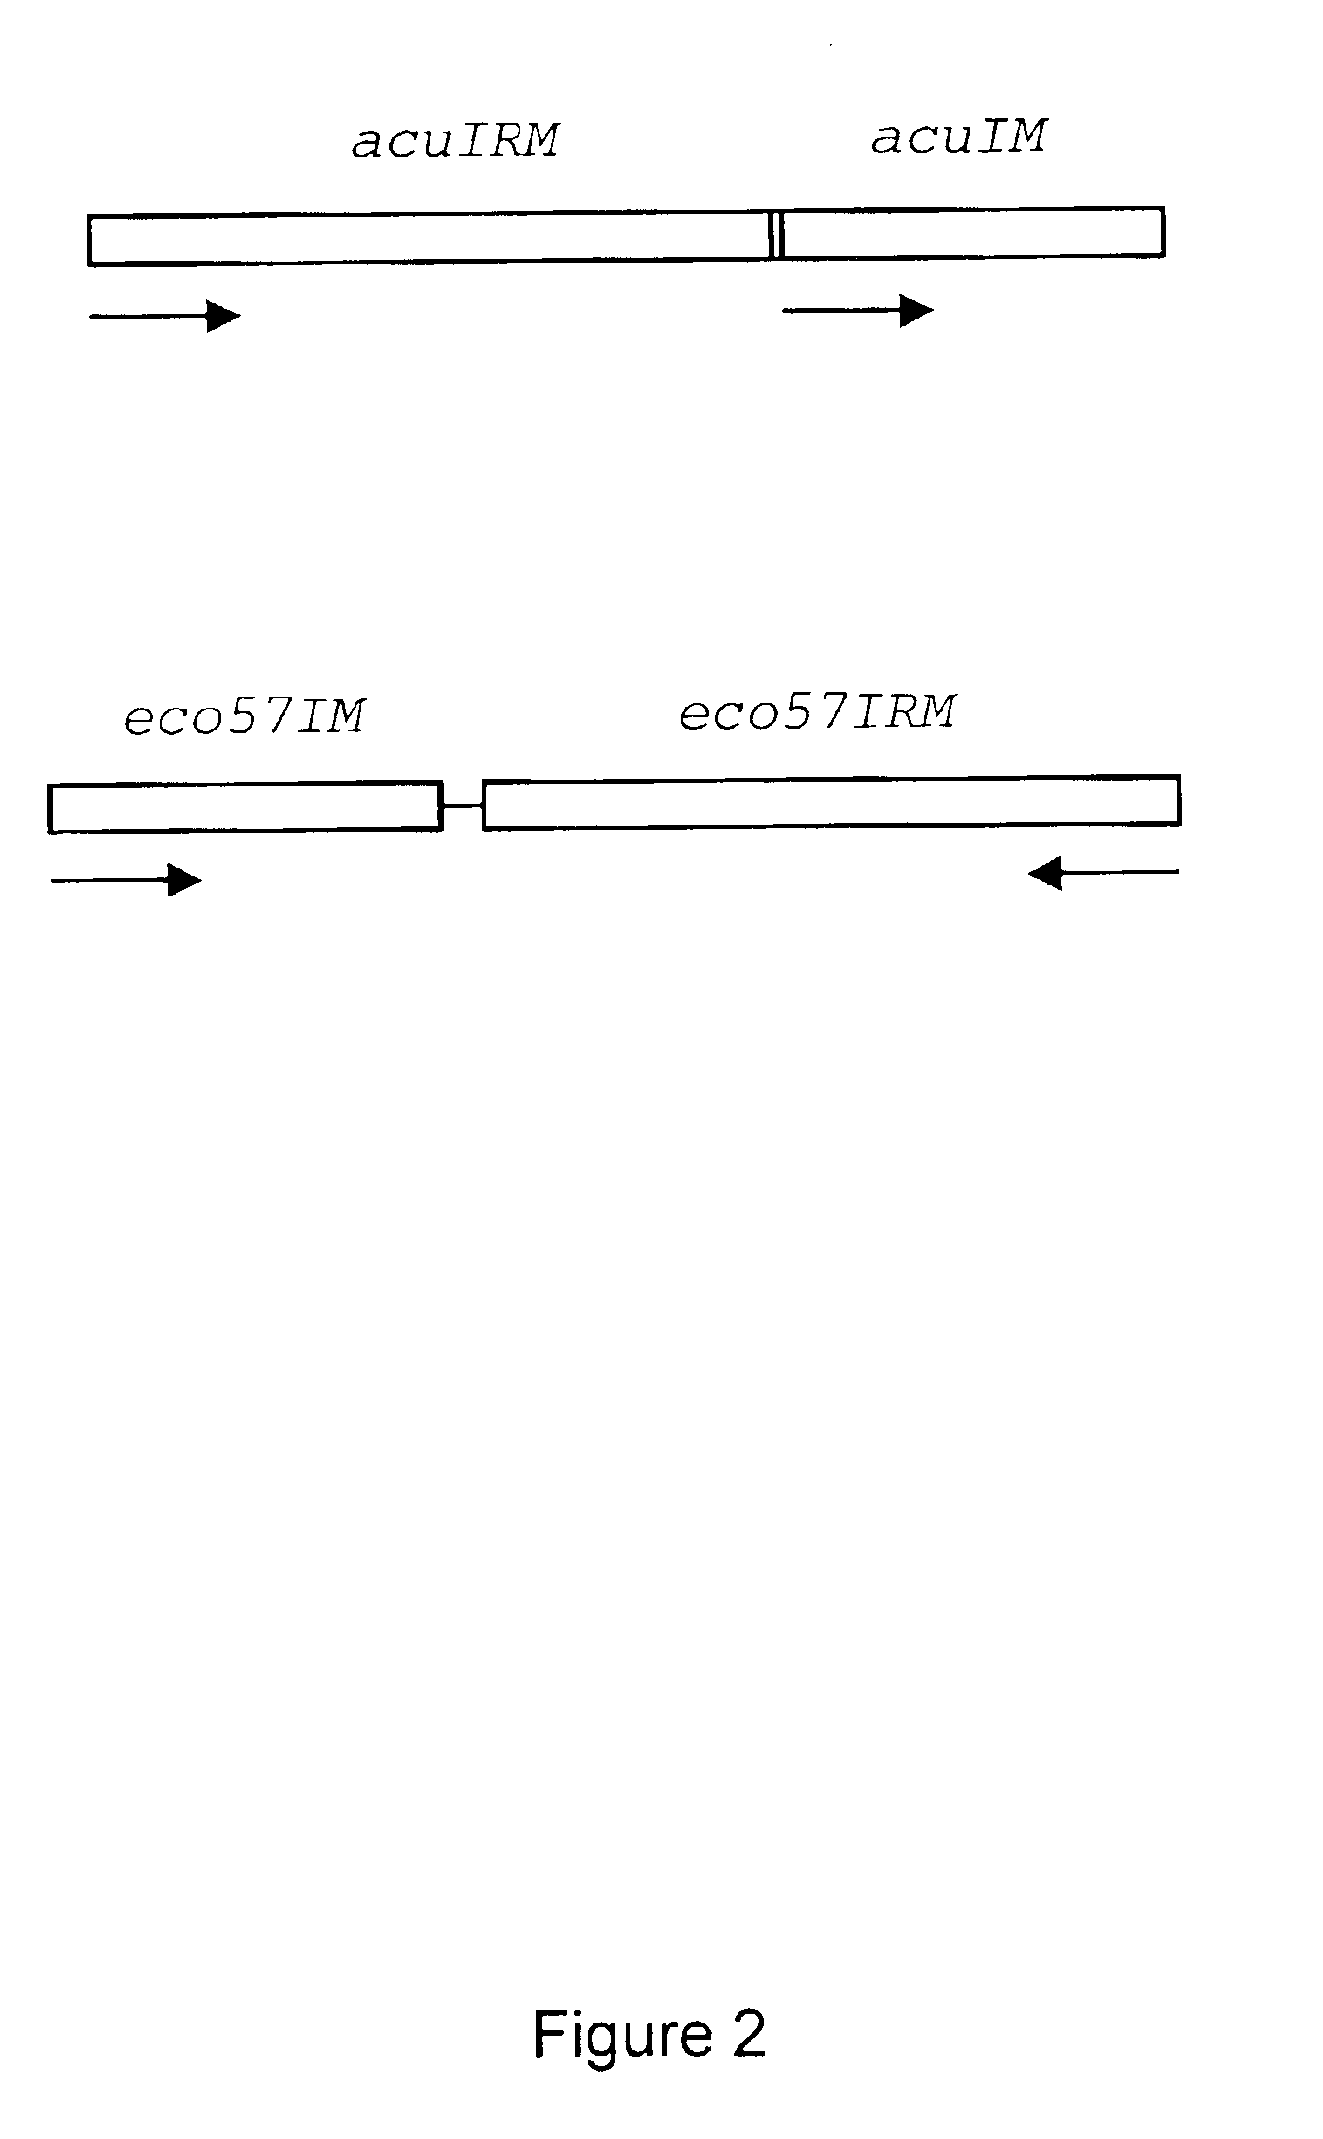 Method for cloning and expression of AcuI restriction endonuclease and AcuI methylase in E. coli 